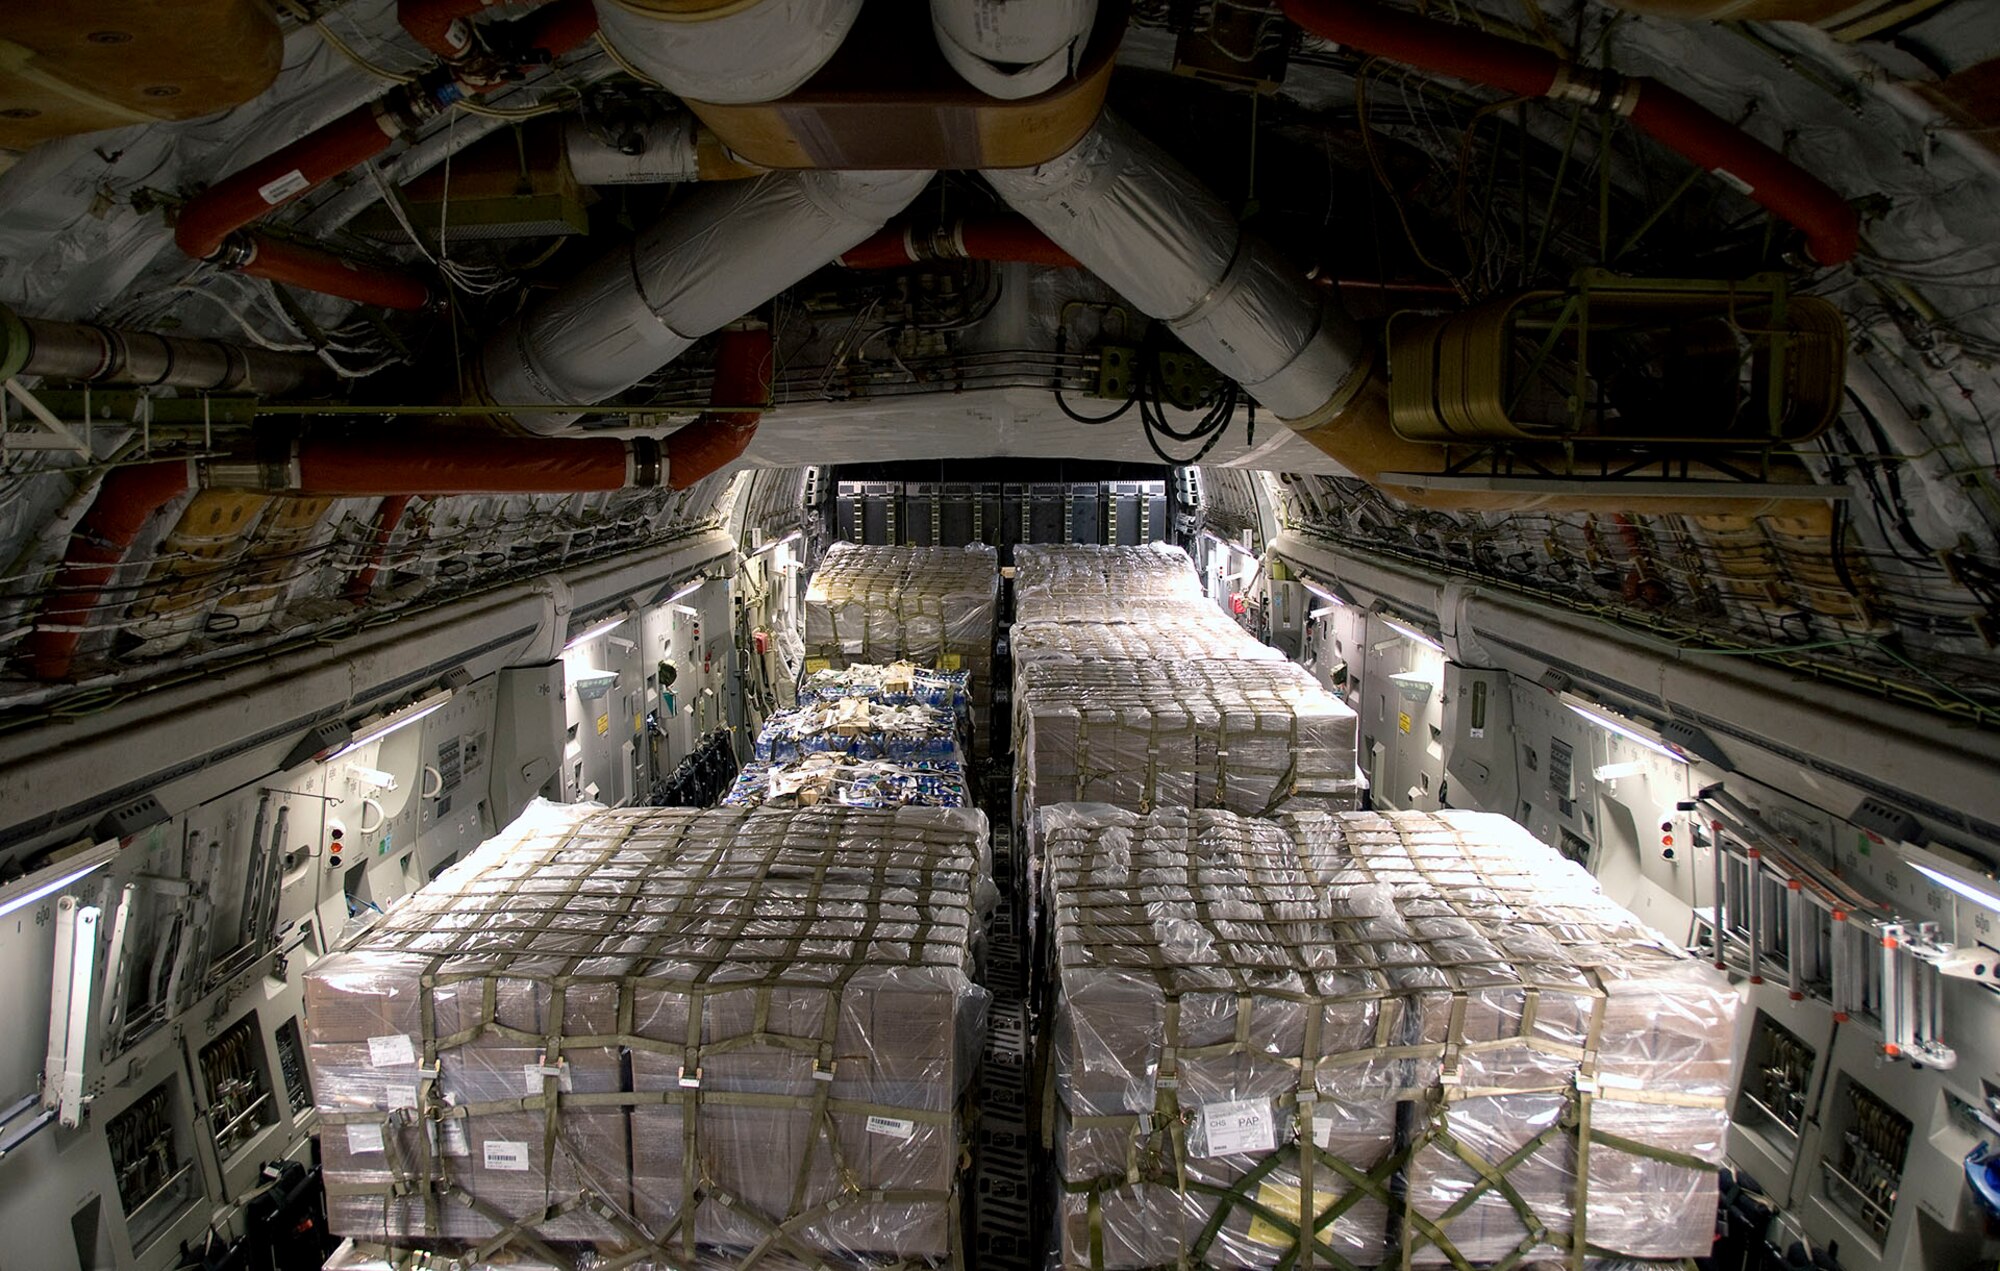 Nine pallets of bottled water and seven pallets of Meals-Ready-to-Eat sit on a McChord AFB C-17 after being loaded at Charleston AFB Jan. 18. Members of the 437th Aerial Port Squadron and 10th Airlift Squadron loadmasters worked together to load the 16 pallets, which weighed approximately 116,000 pounds and included more than 40,000 bottles of water and 30,000 meals. The supplies were flown out of Charleston AFB at approximately 6:30 a.m. on the first mission to leave the base since it assumed the role of a distribution hub for food and water to Haiti. (U.S. Air Force photo/Staff Sgt. Daniel Bowles)